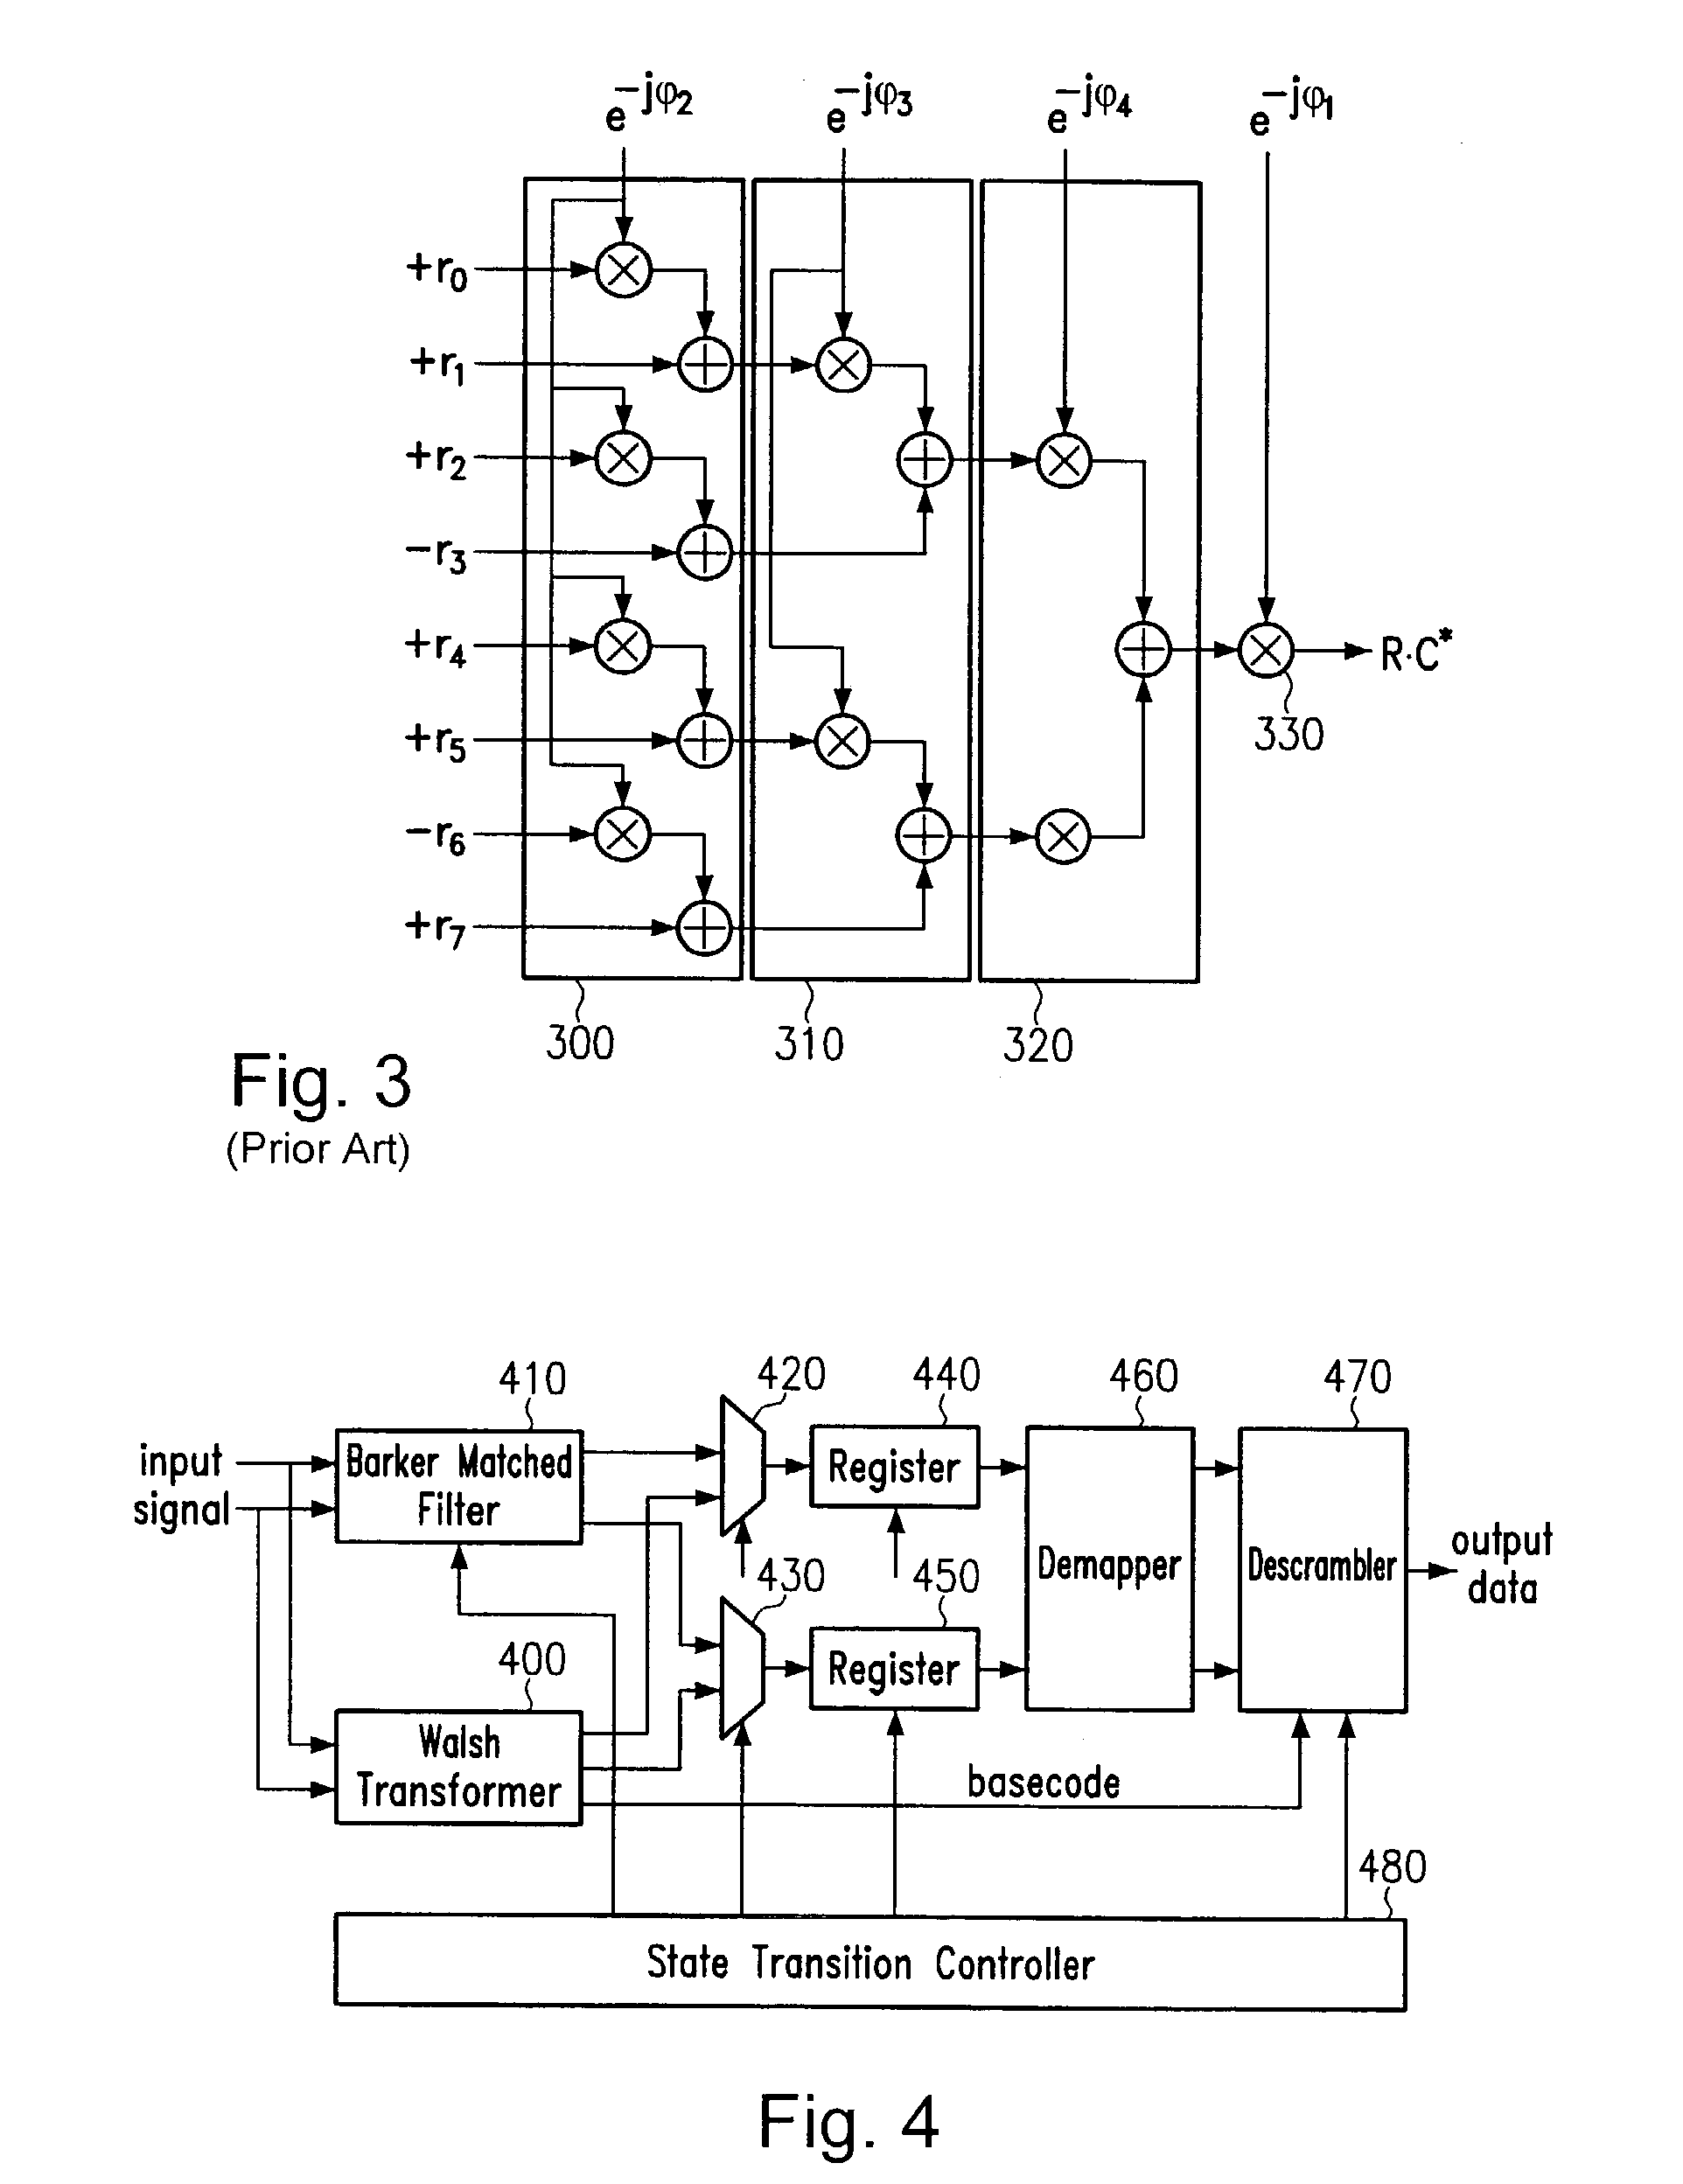 Complementary code decoding by reduced sized circuits